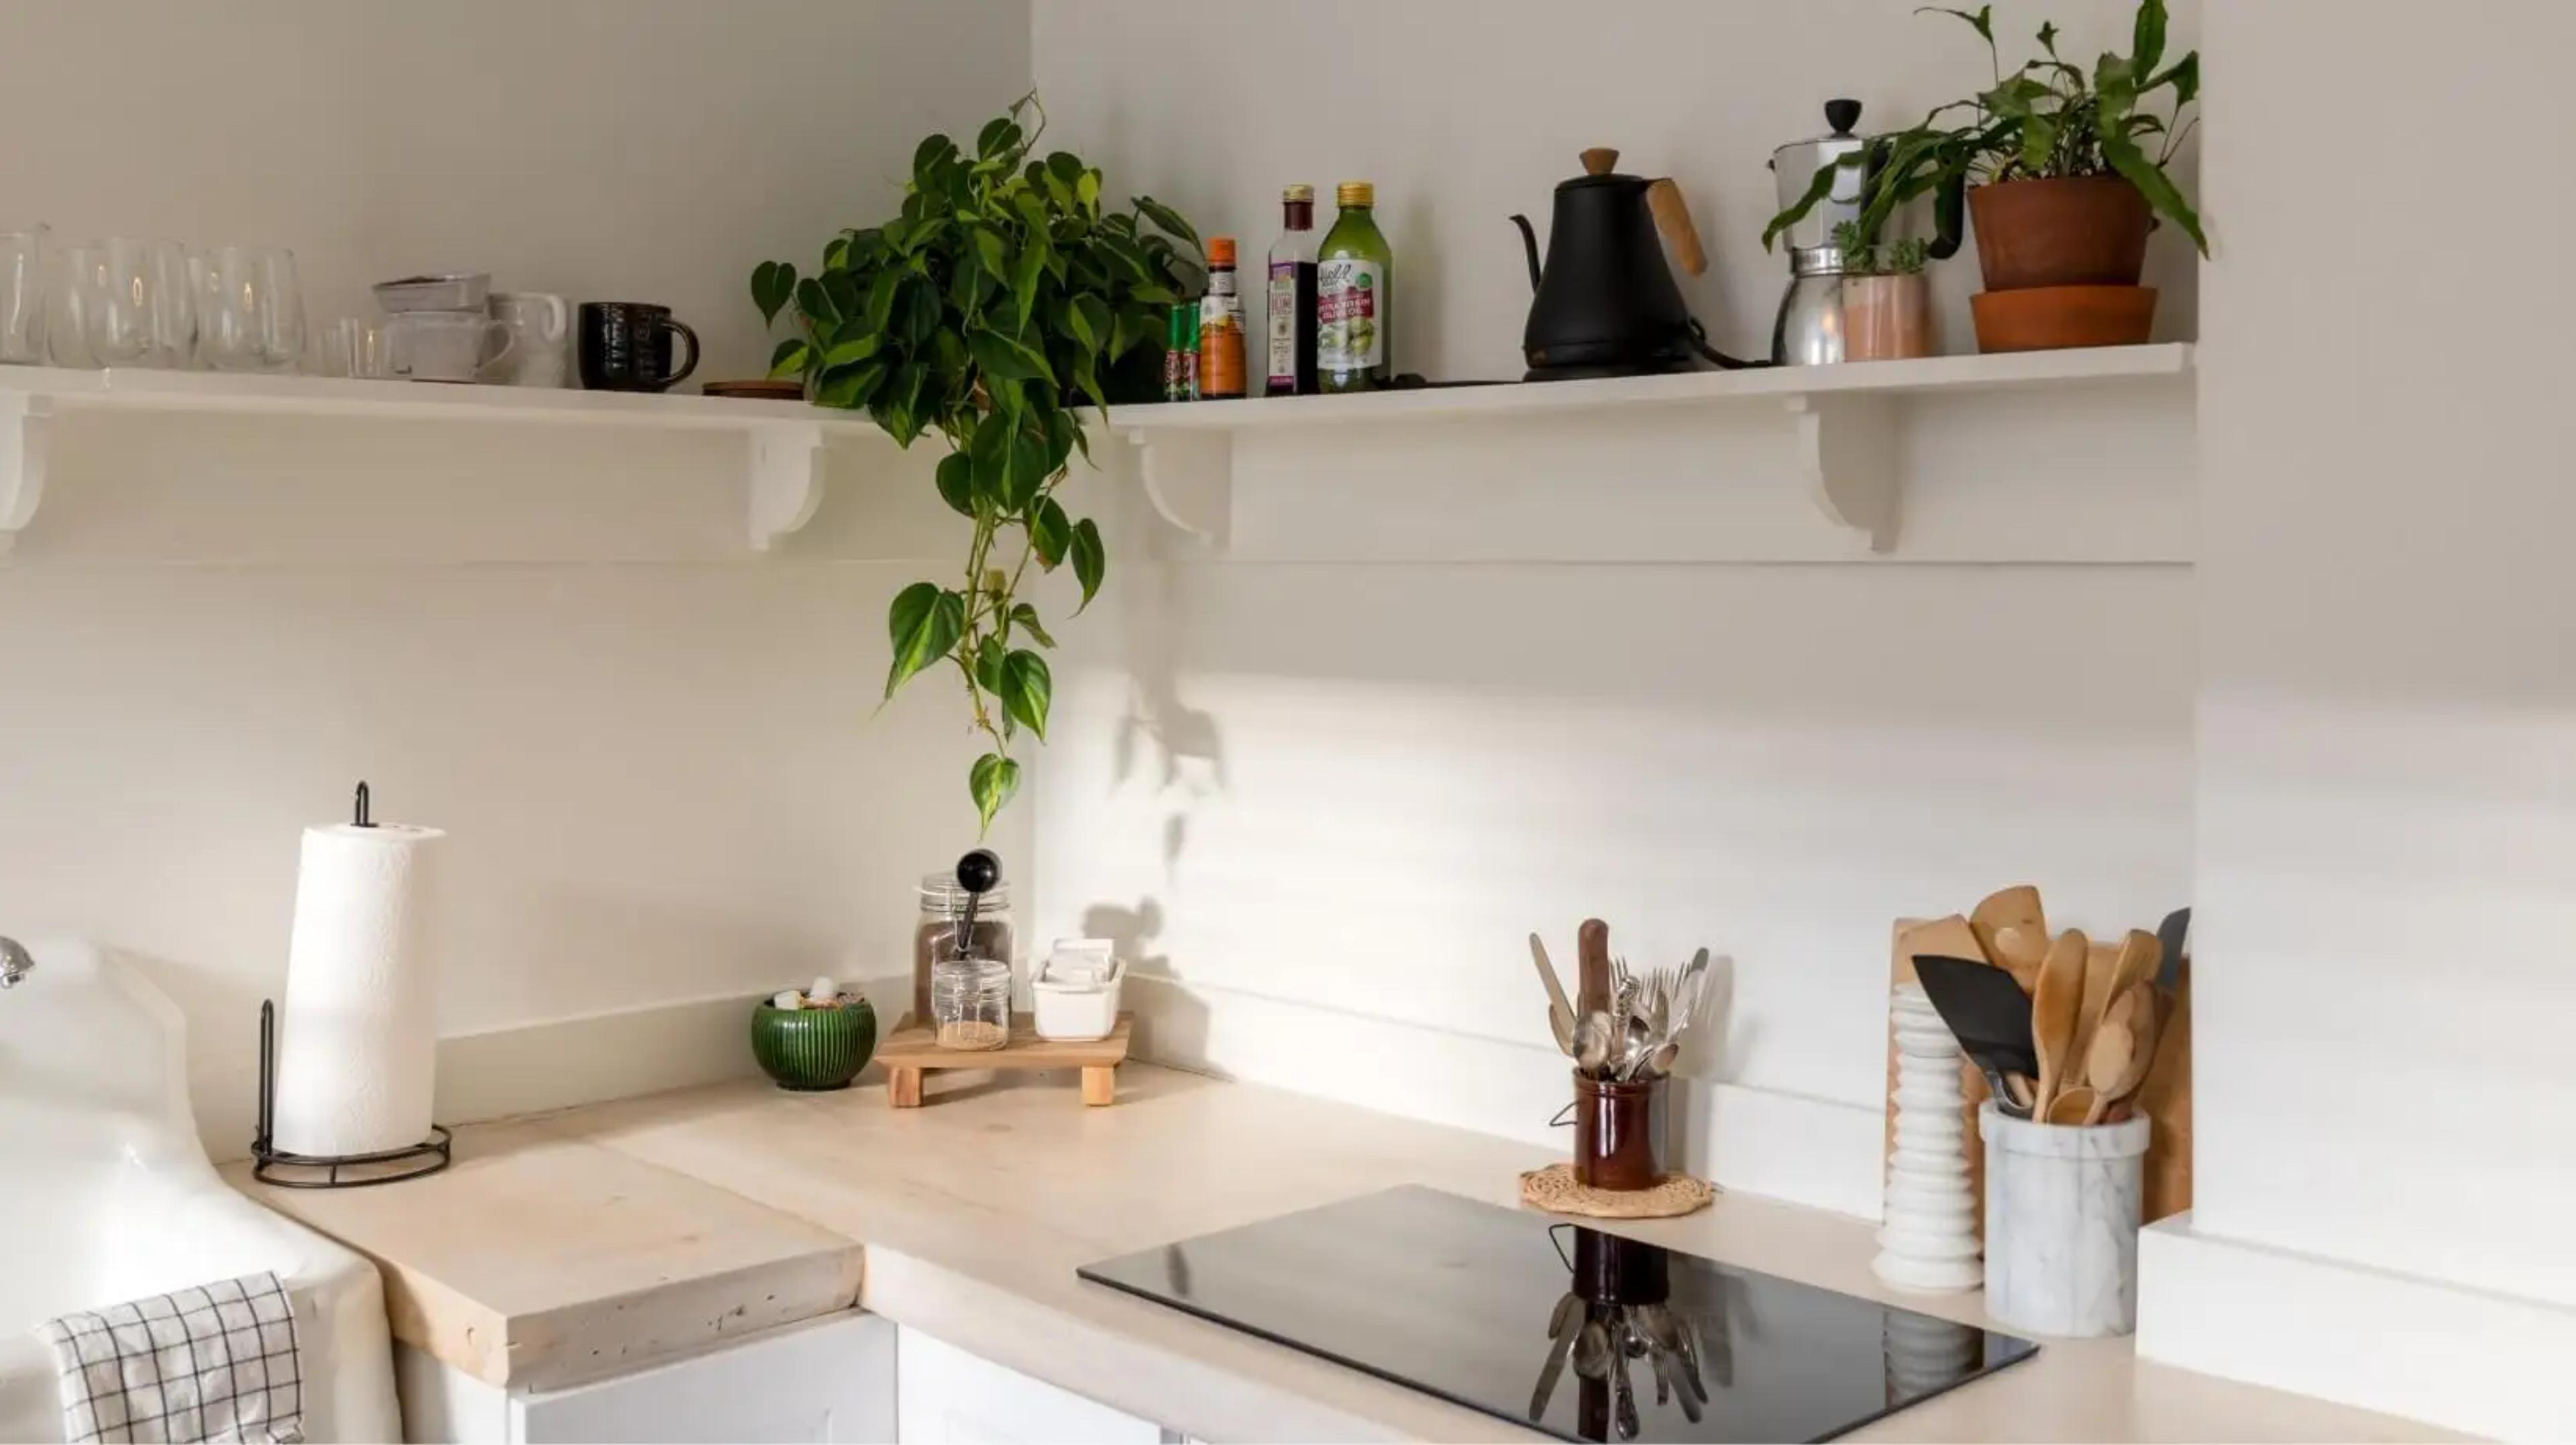 Kitchen with house plants